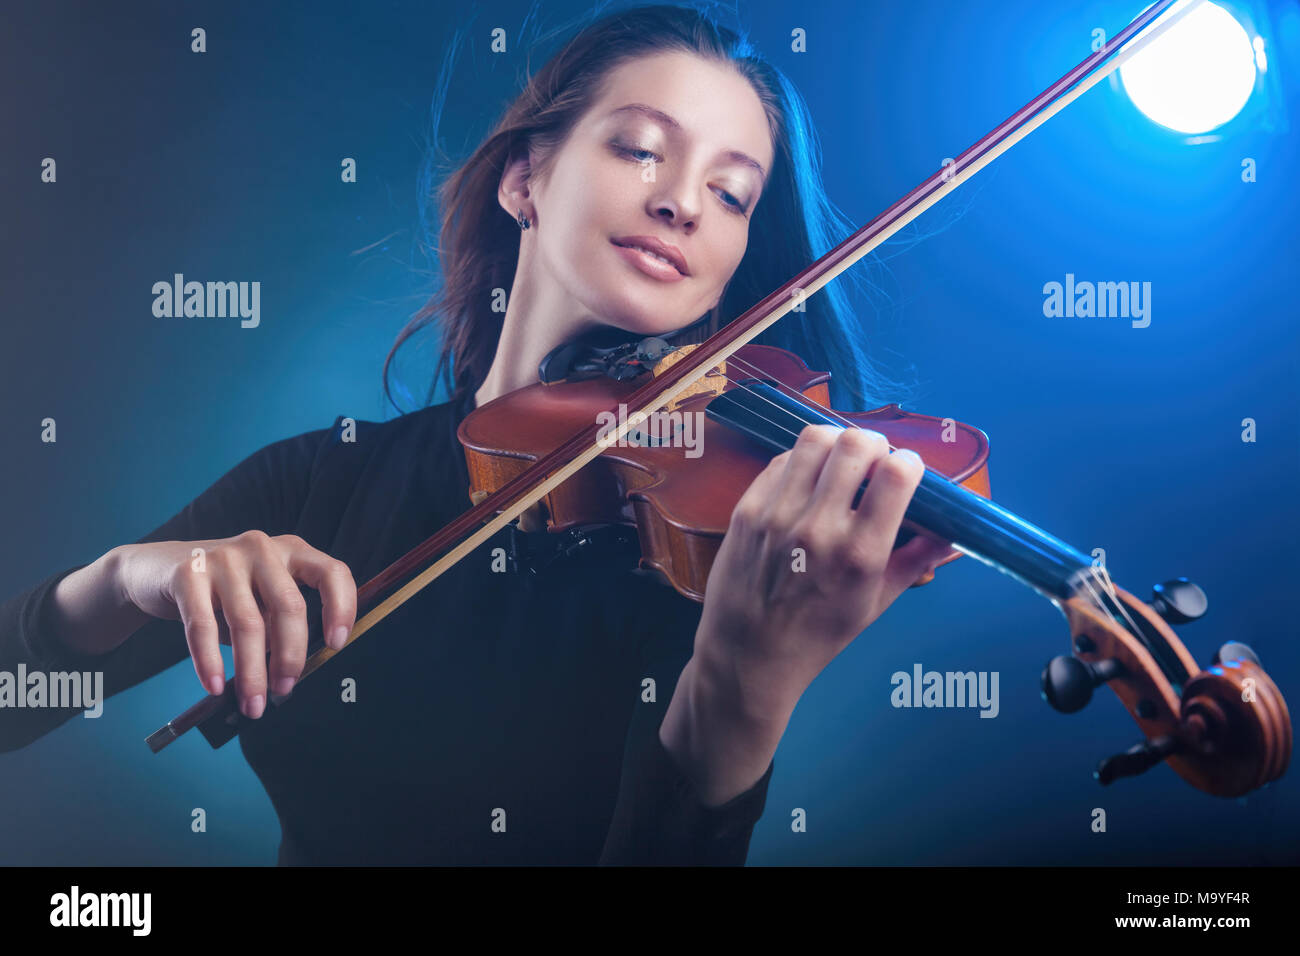 Beautiful young woman playing the violin on dark blue background. Studio shot Stock Photo